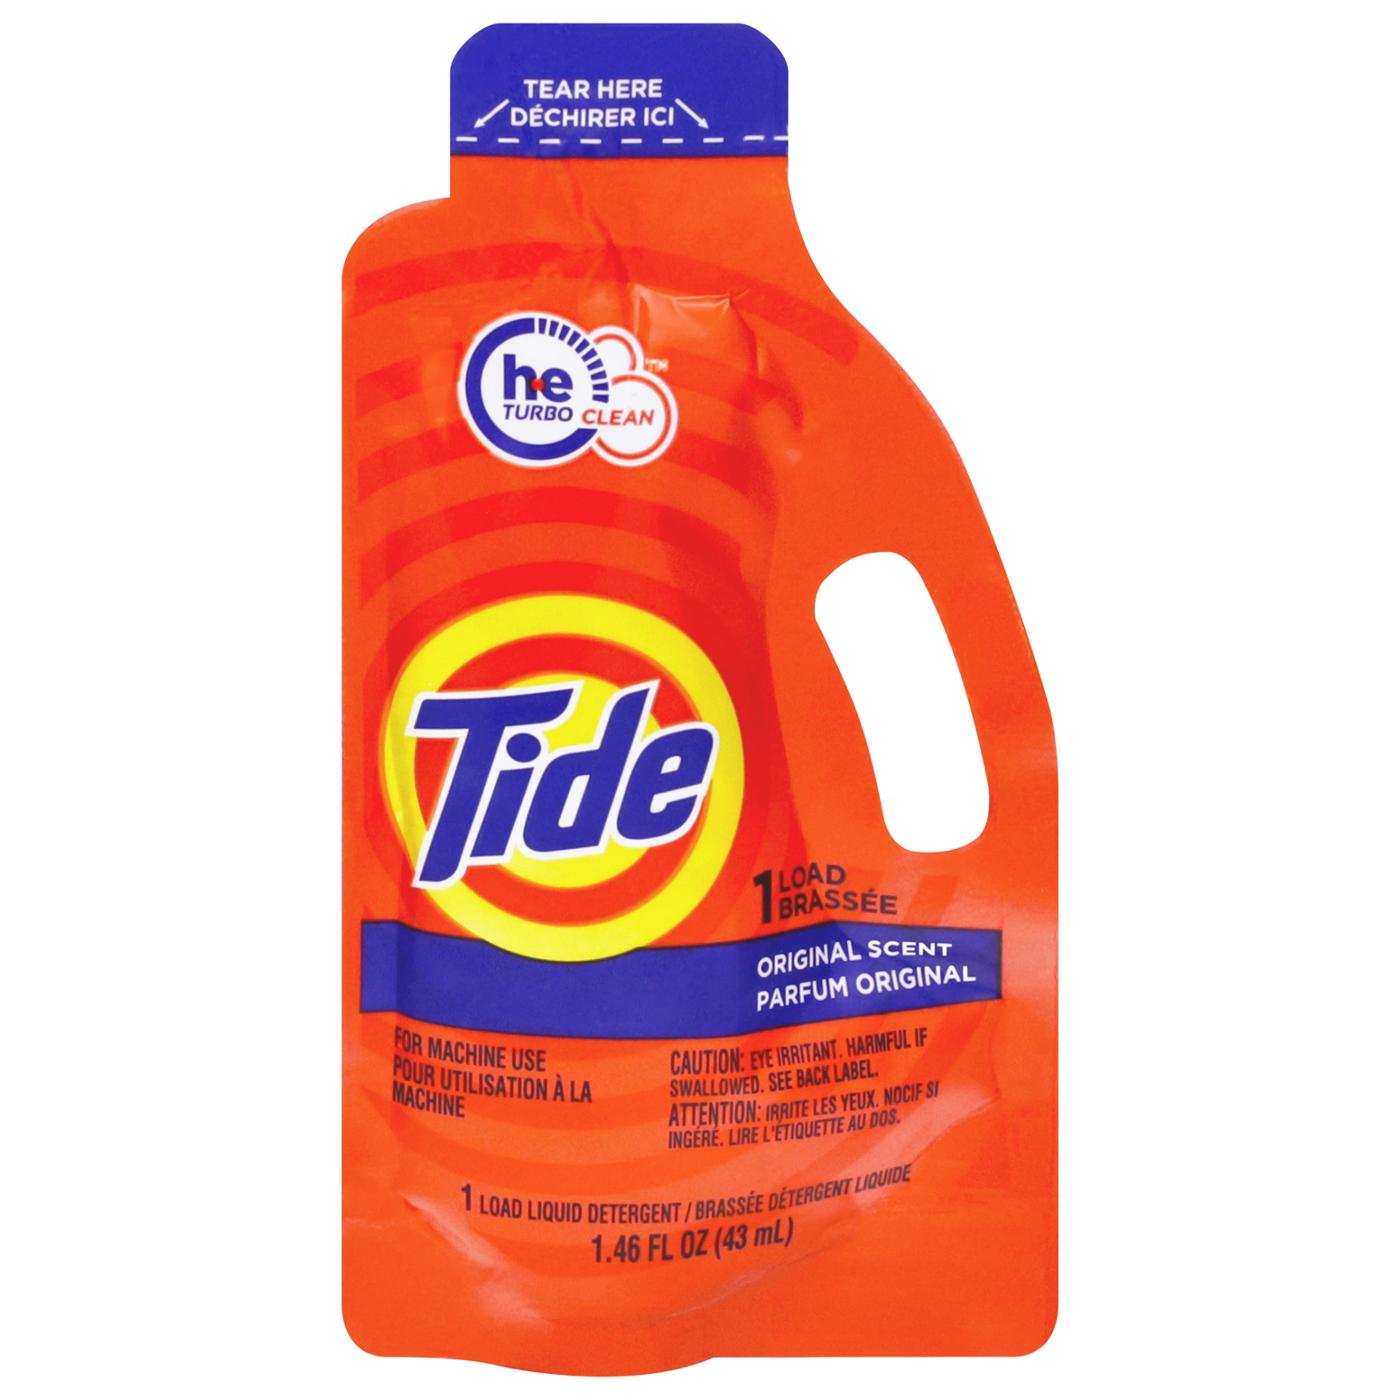 TIDE Travel Size One Load Liquid Laundry Detergent; image 1 of 2